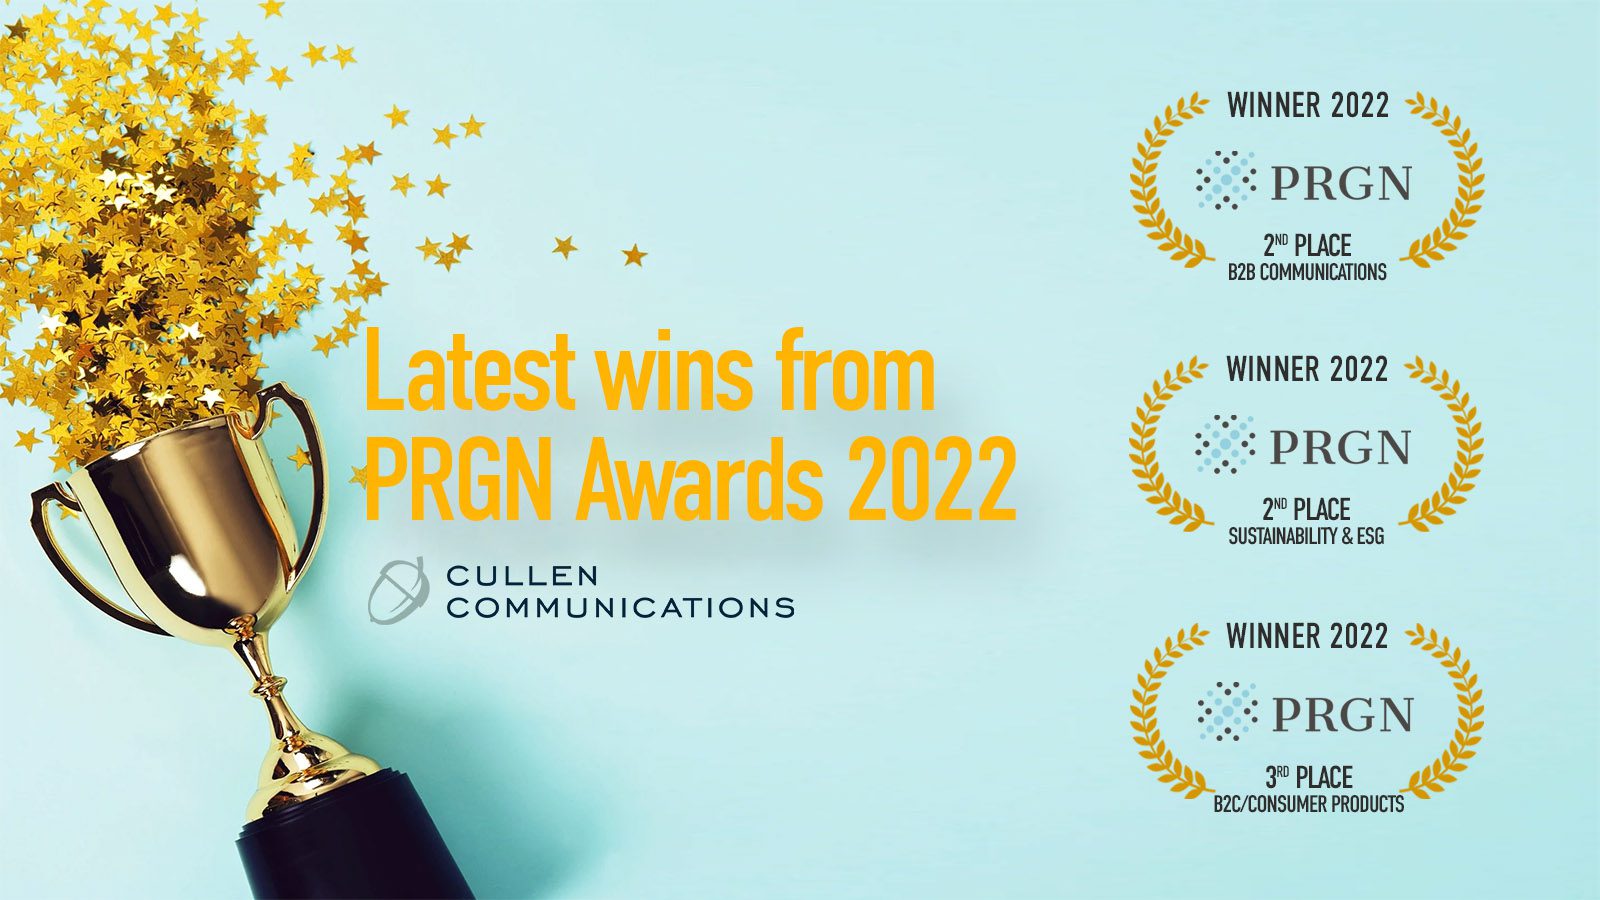 Cullen Communications - PRGN Awards 2022 Wins in 3 categories